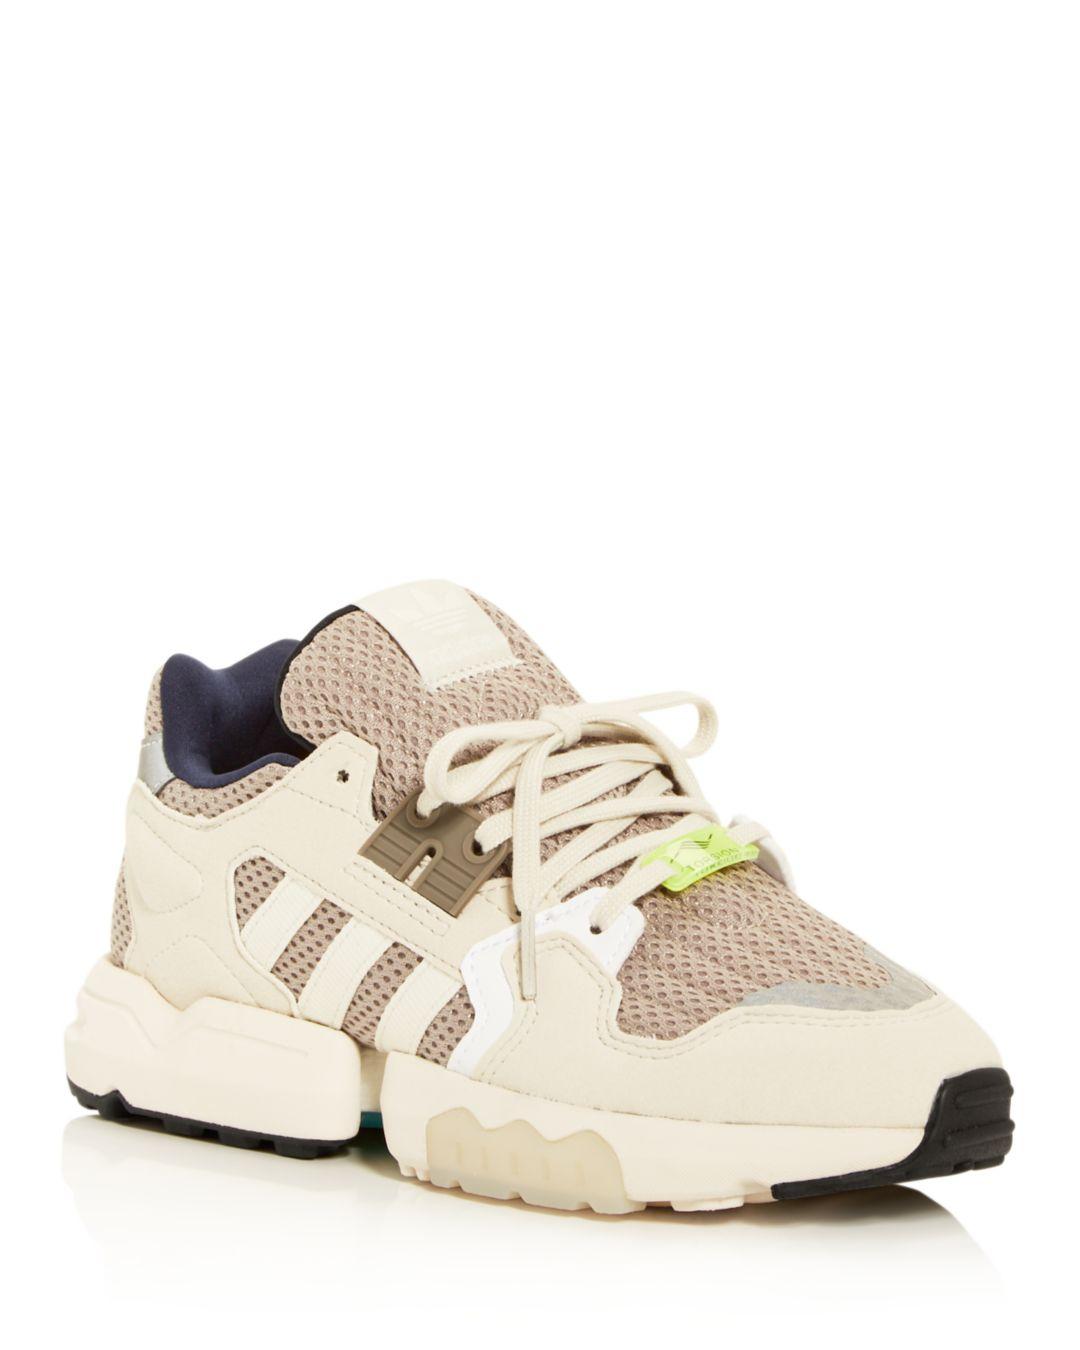 tryk Hjelm foretrække adidas Synthetic Zx Torsion Low - Top Sneakers - Lyst